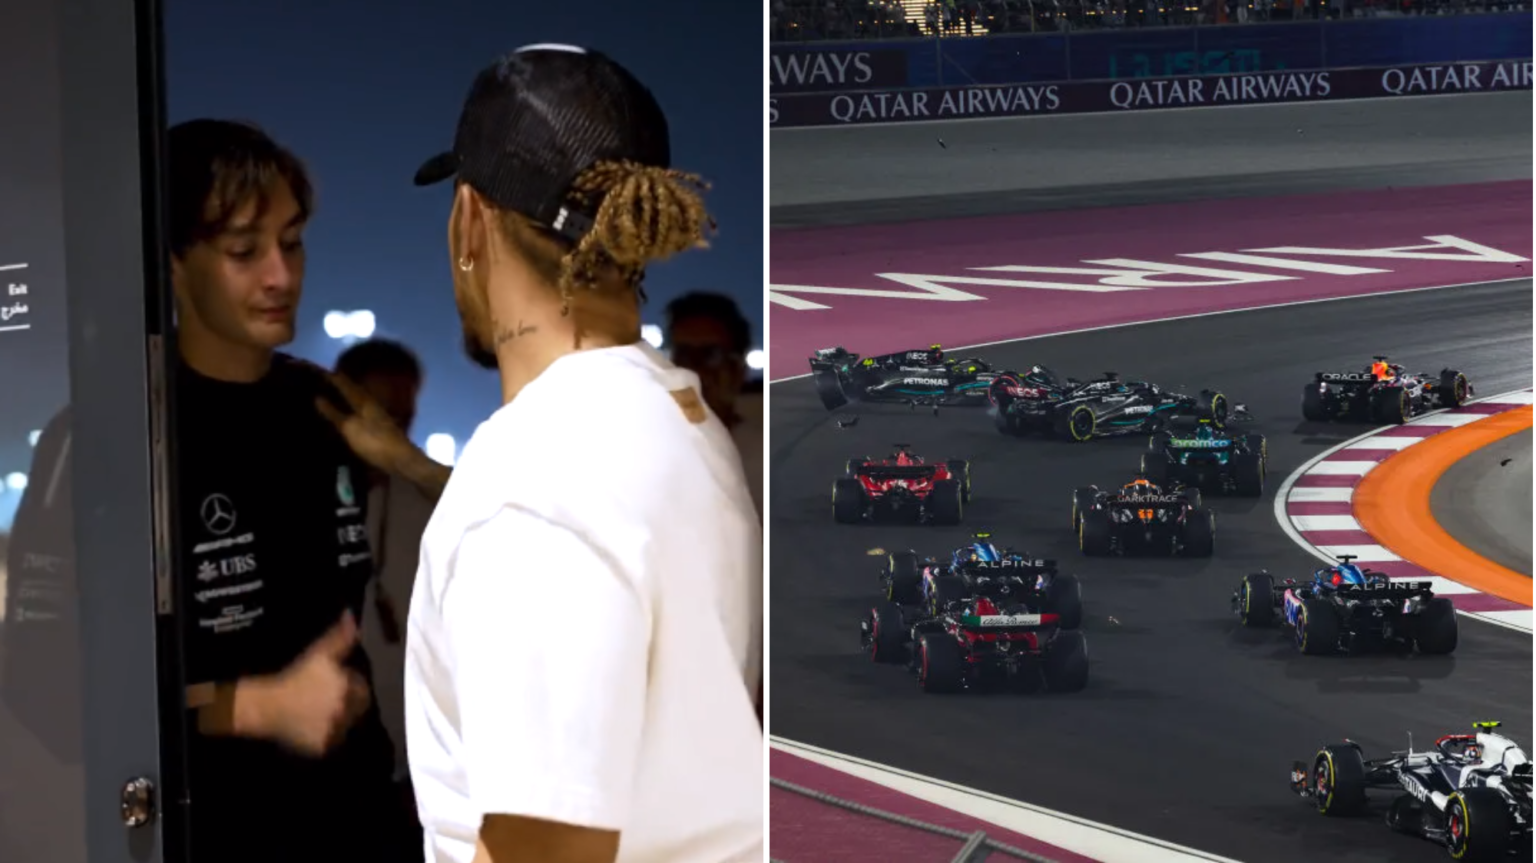 George Russell responds to Lewis Hamilton’s apology after Qatar Grand Prix crash